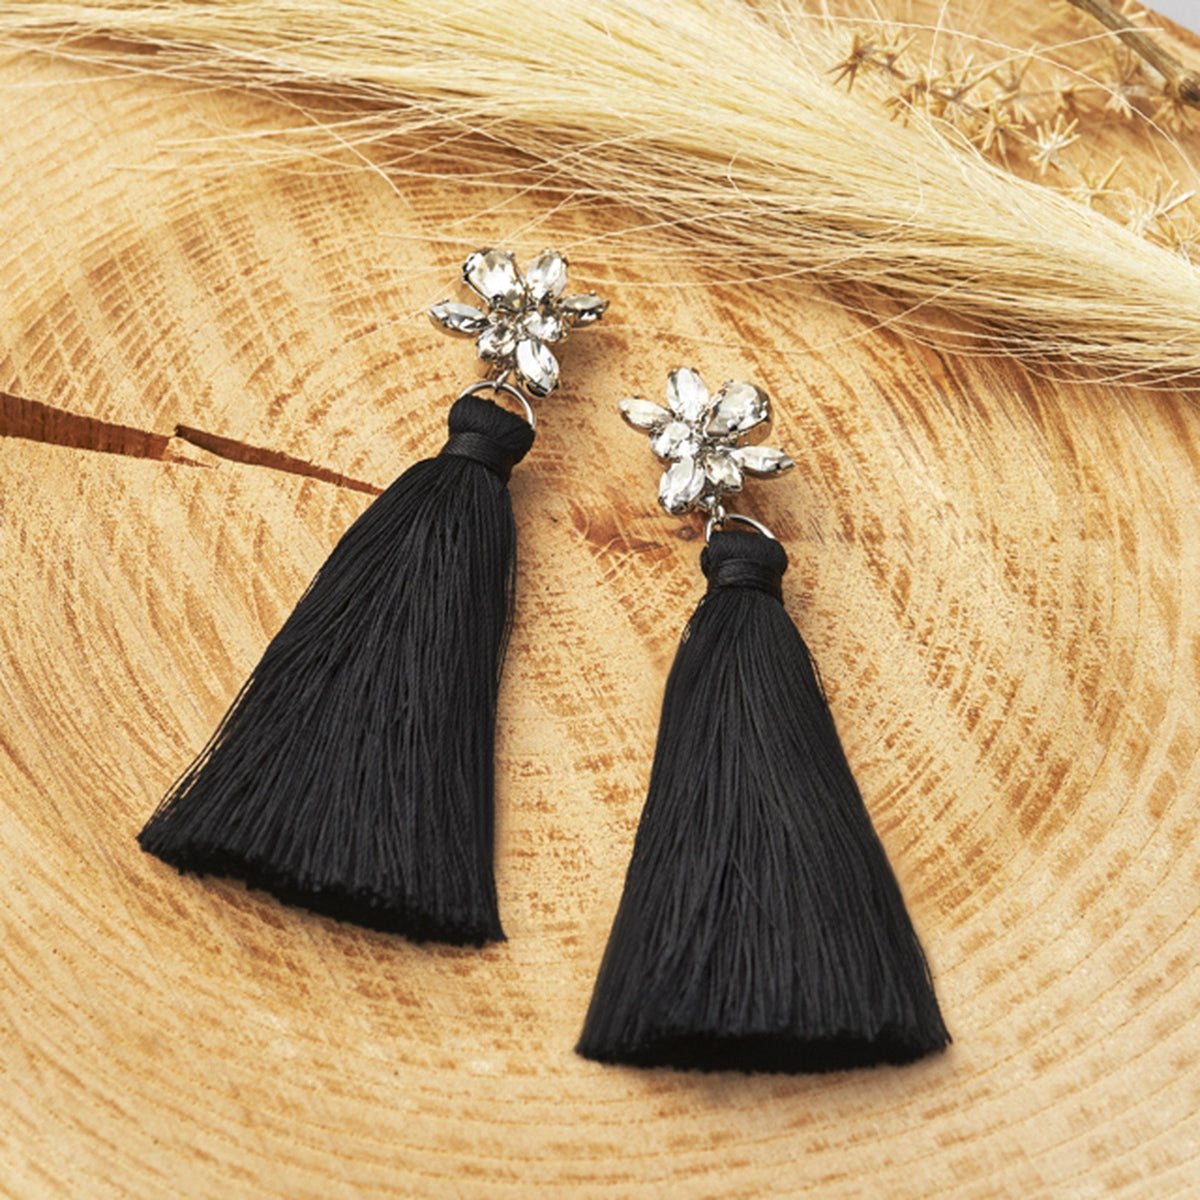 TI ADORO feather earring フェザーイヤリング